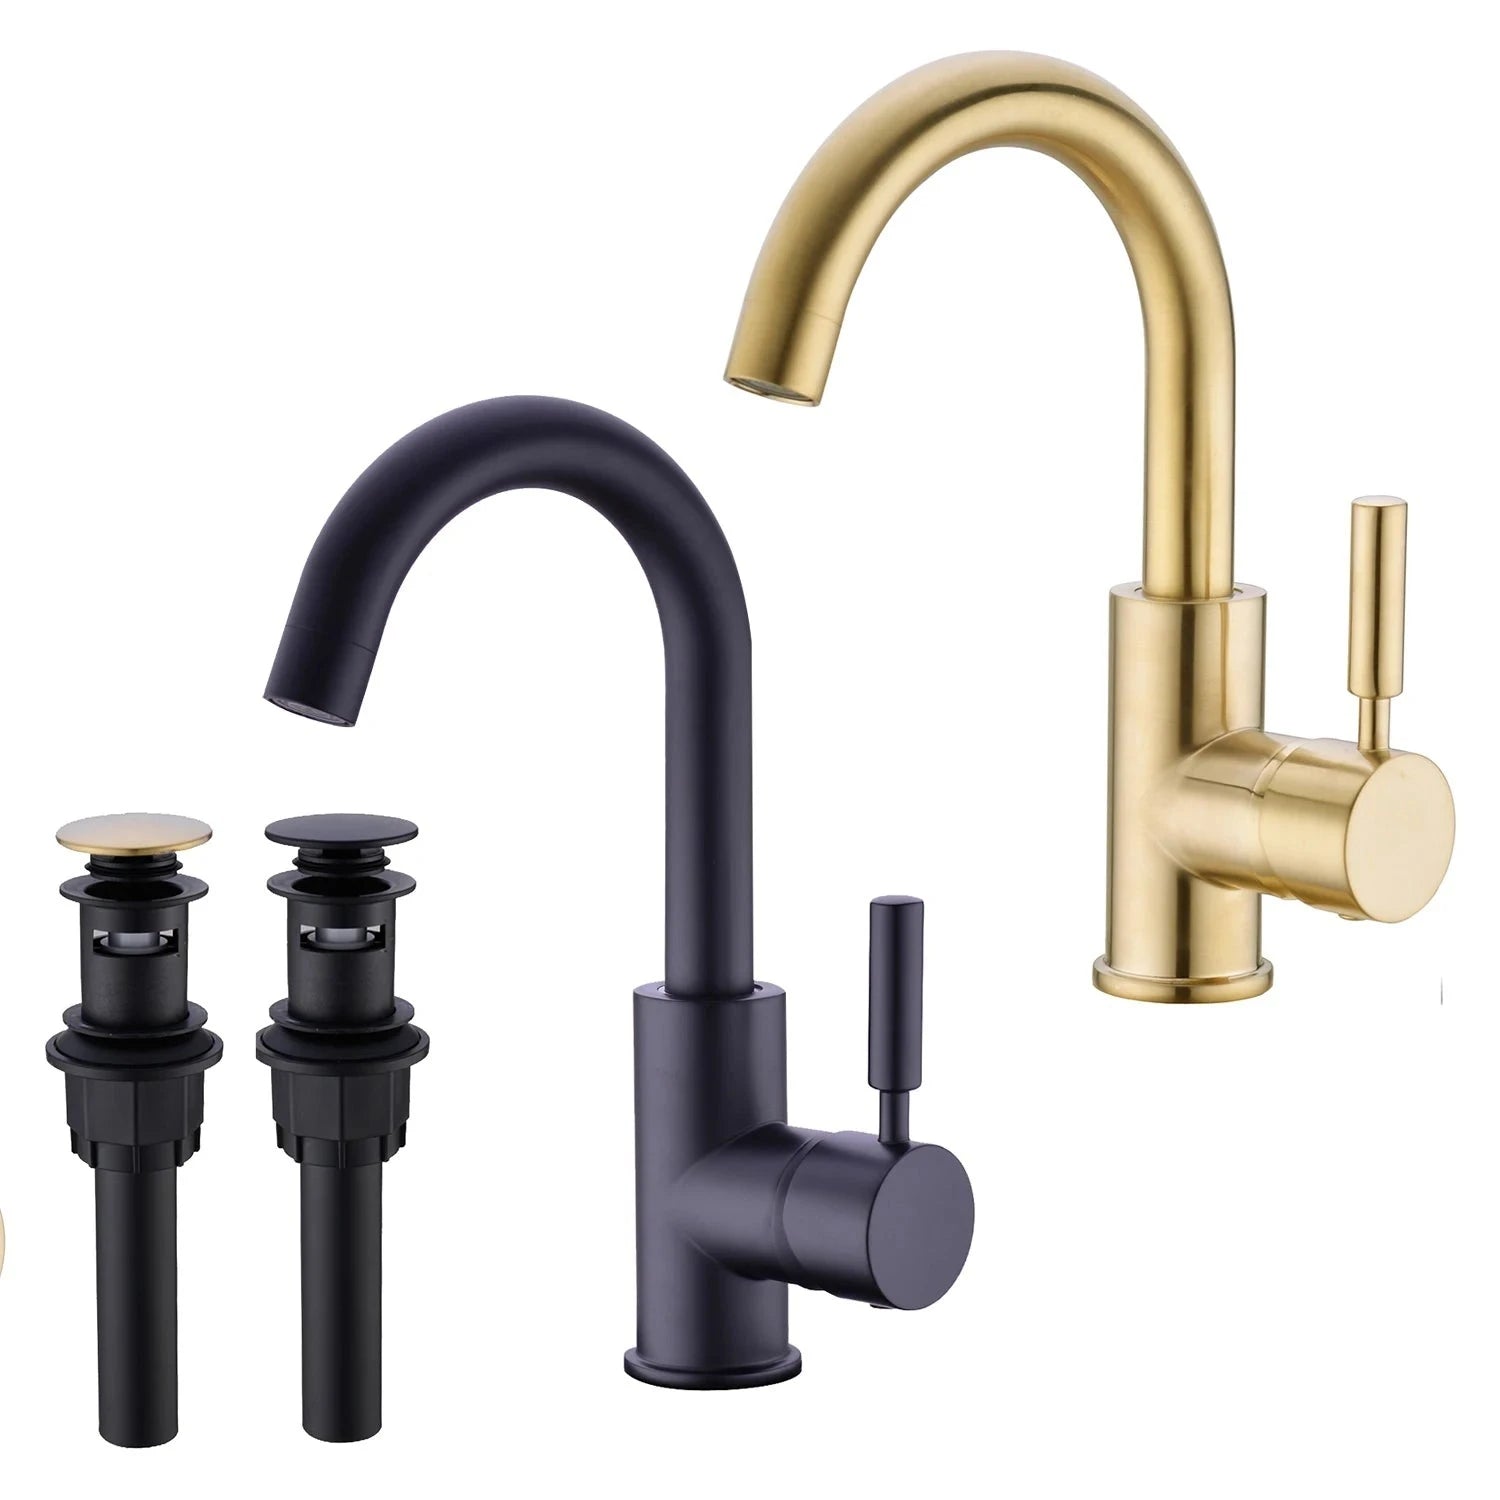 Basin Faucet Cold And Hot Water Mixer Sink Tap